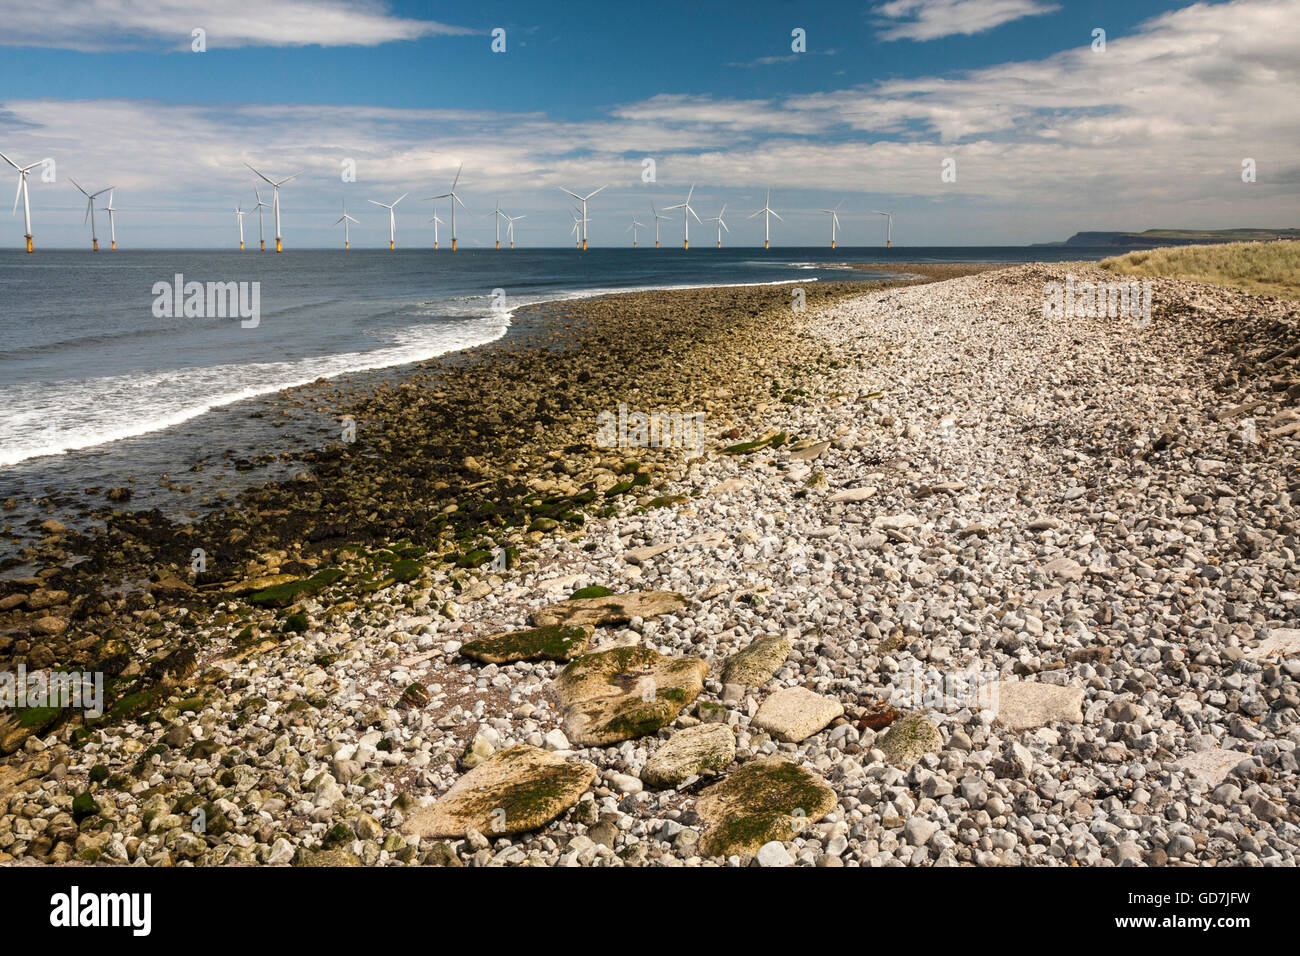 The rocky beach at Redcar in north east England with the offshore wind turbines and blue cloudy skies Stock Photo